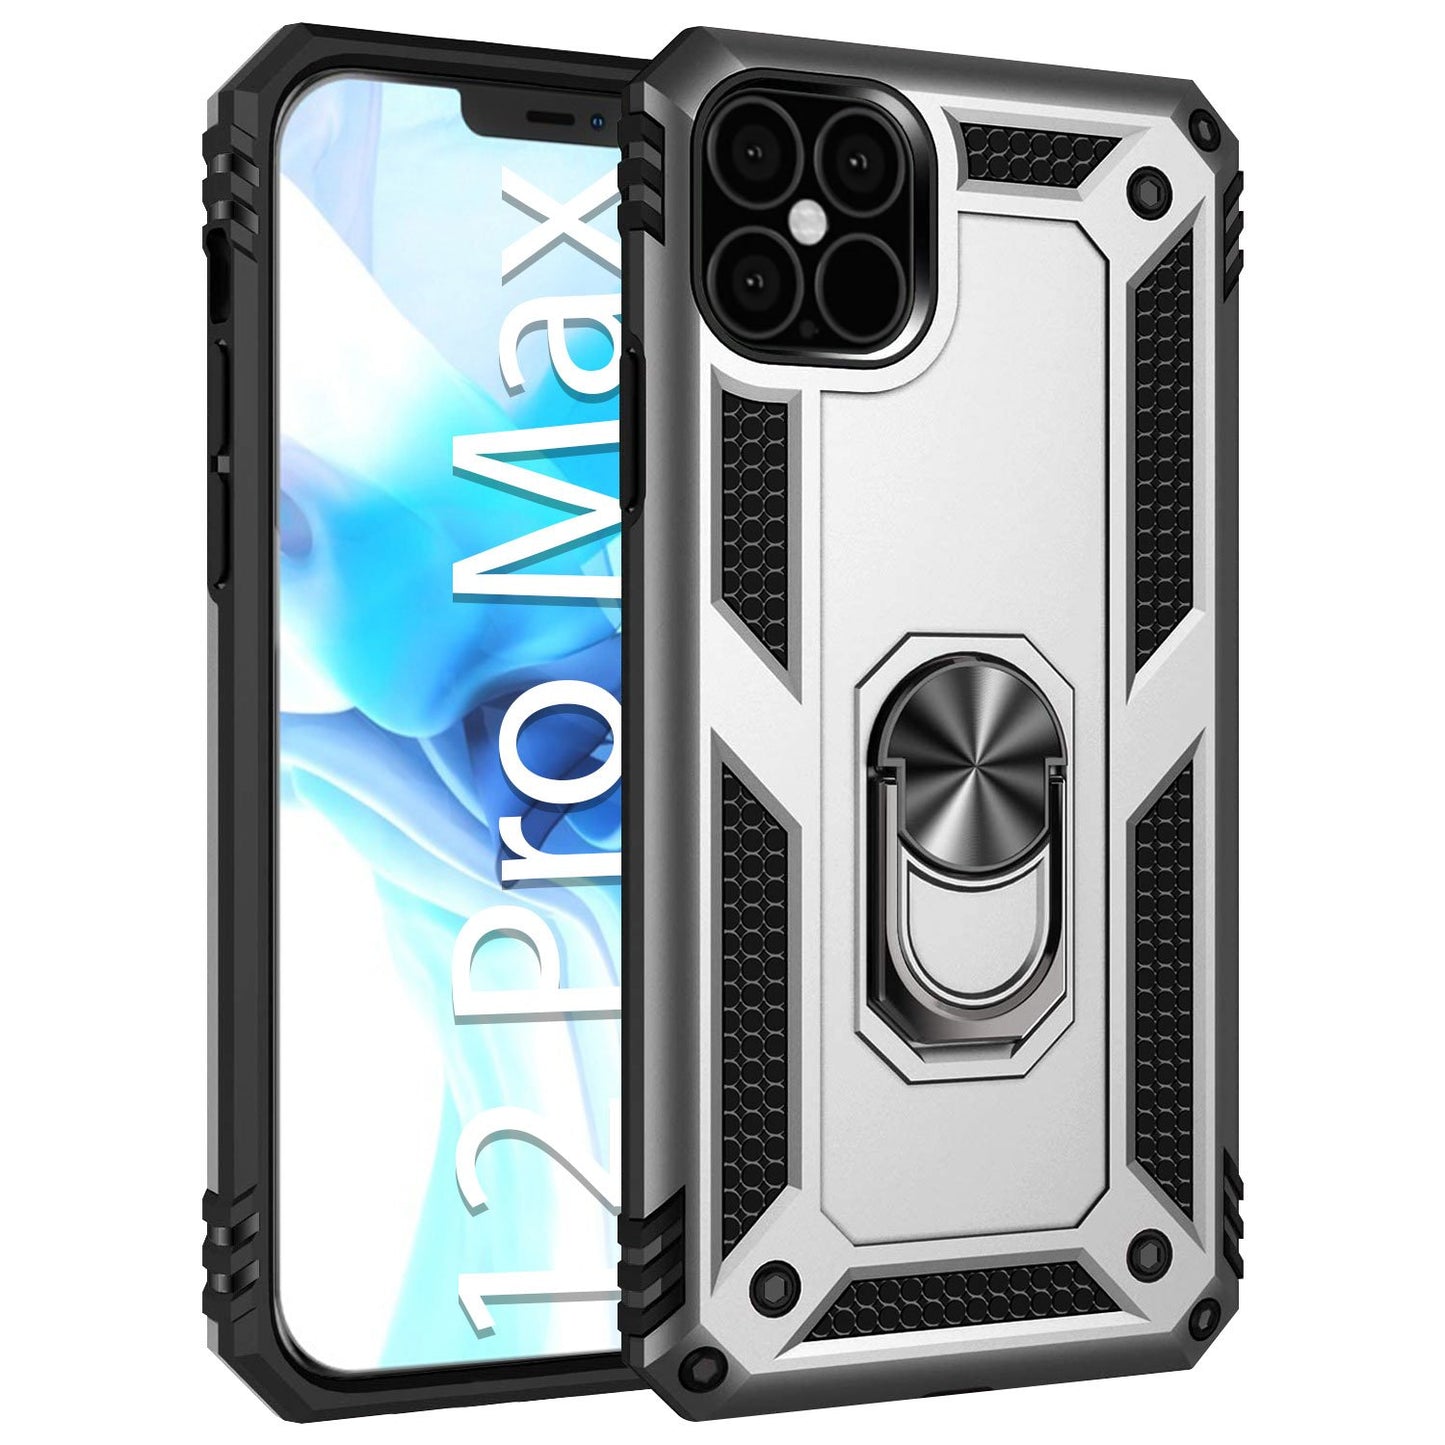 CCIPH12PMIFSL - Cellet Shockproof Case with Built in Ring, Kickstand and Magnet for Car Mounts Compatible to Apple iPhone 12 Pro Max